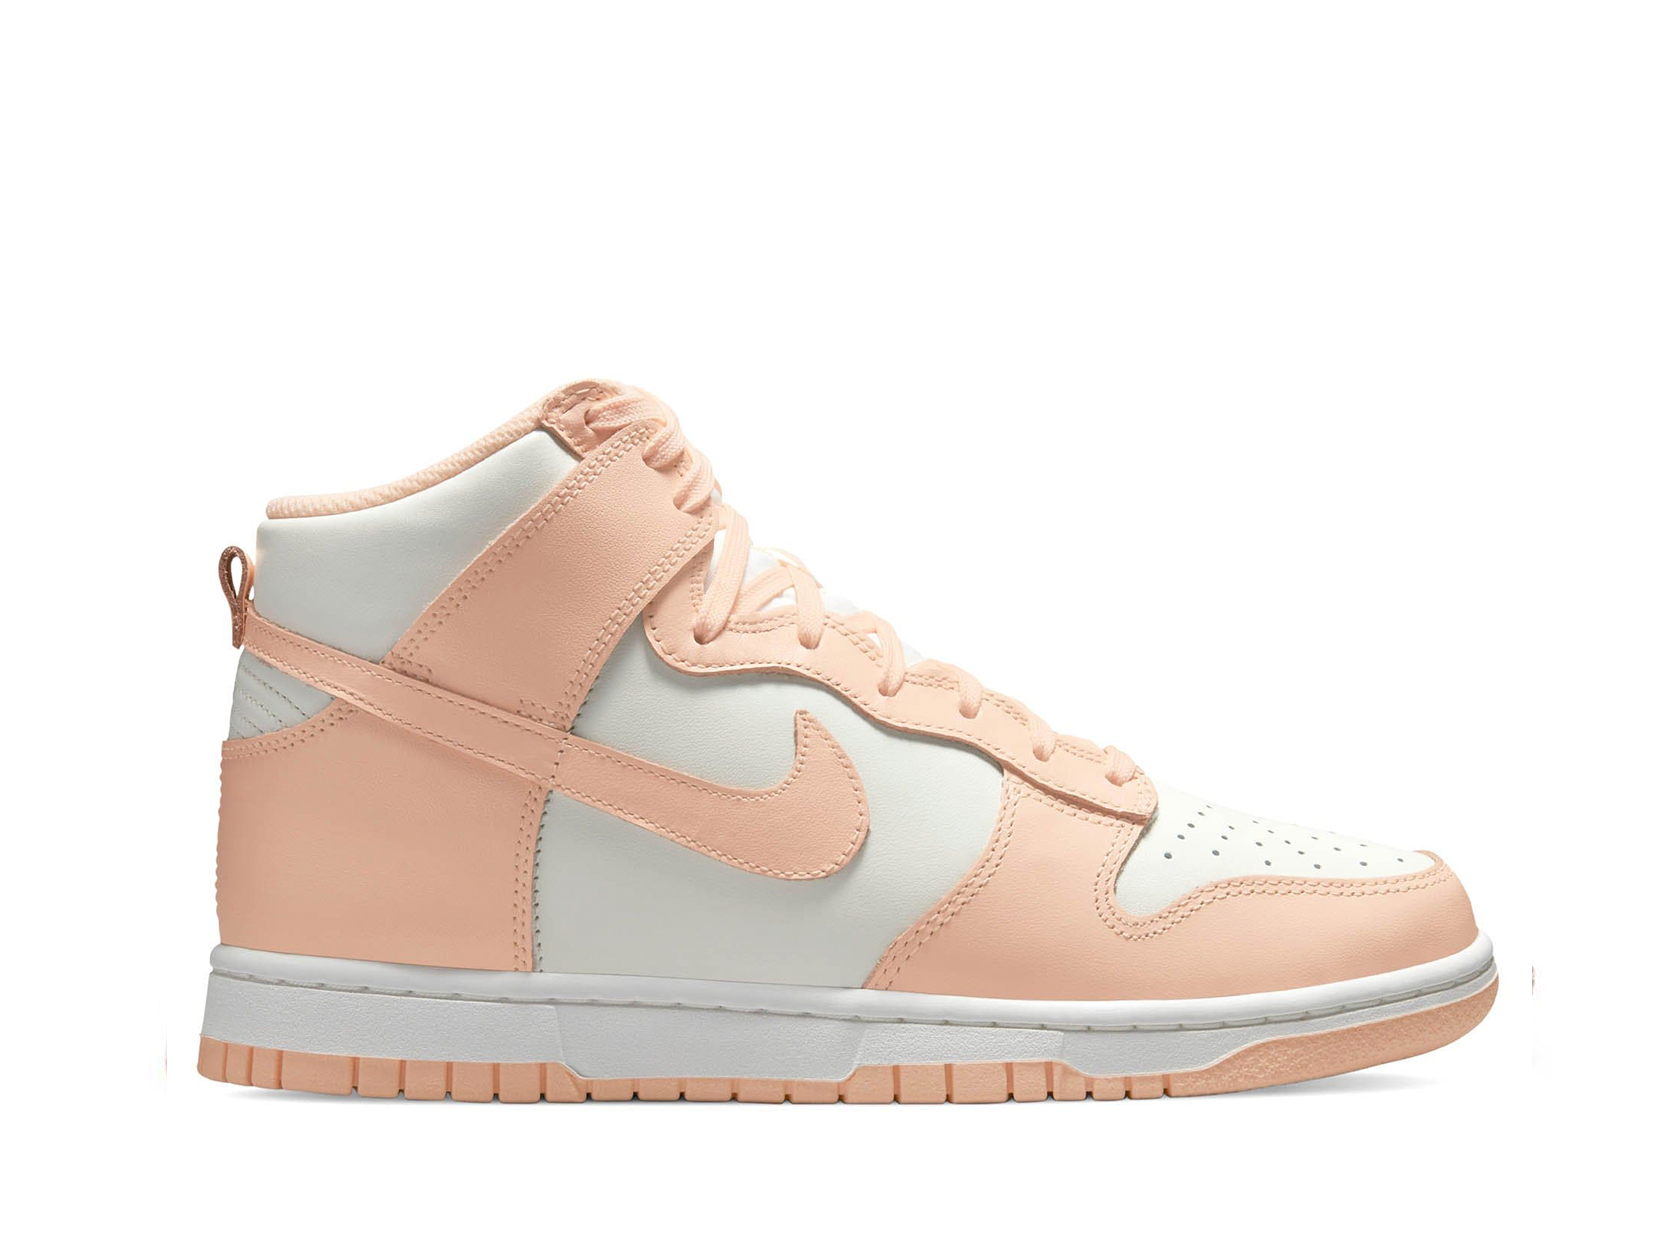 Double Boxed  209.99 Nike Dunk High Crimson Tint (W) Double Boxed